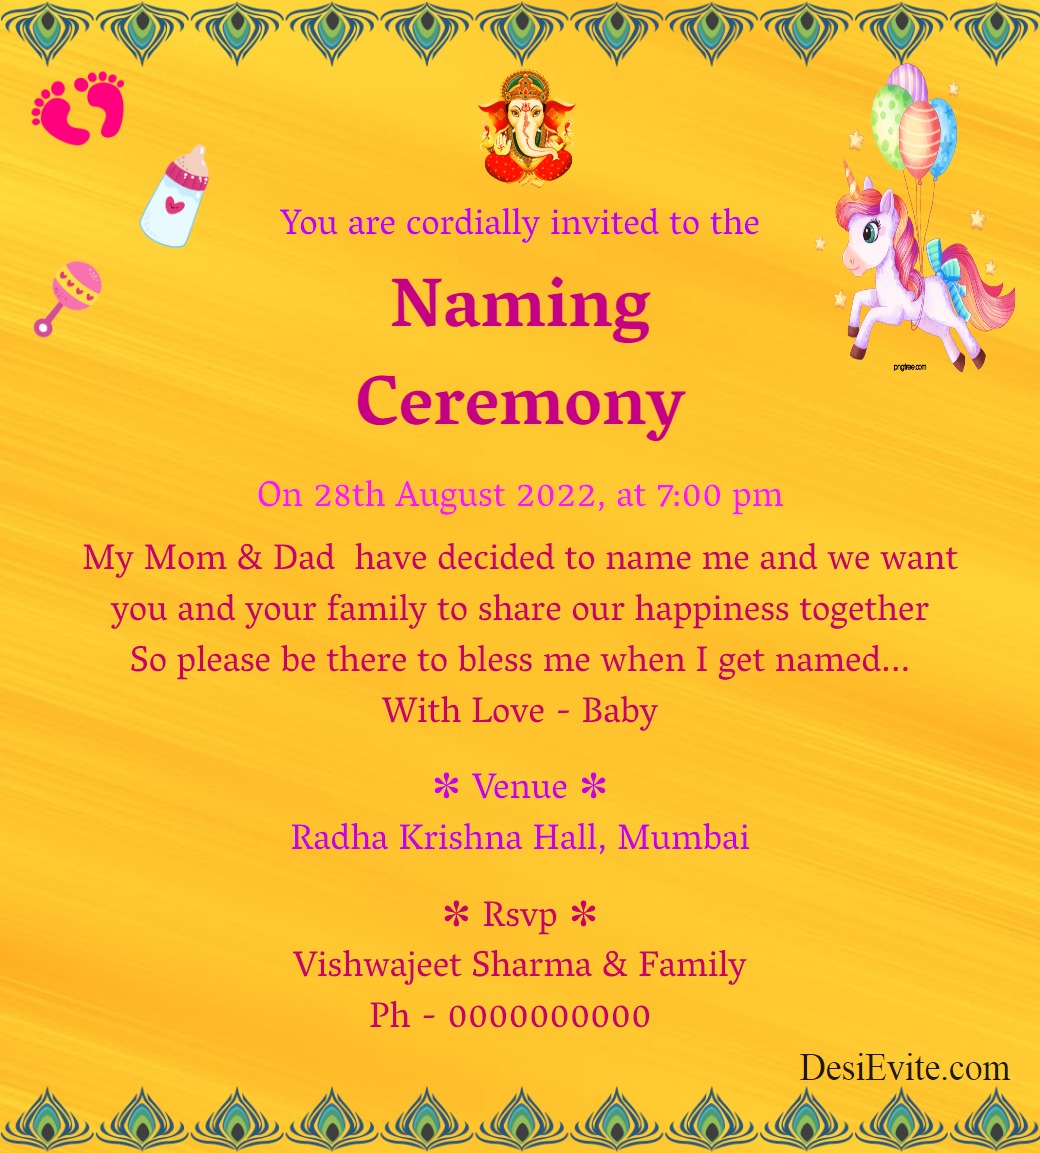 Naming ceremony invitation ecard free without watermark